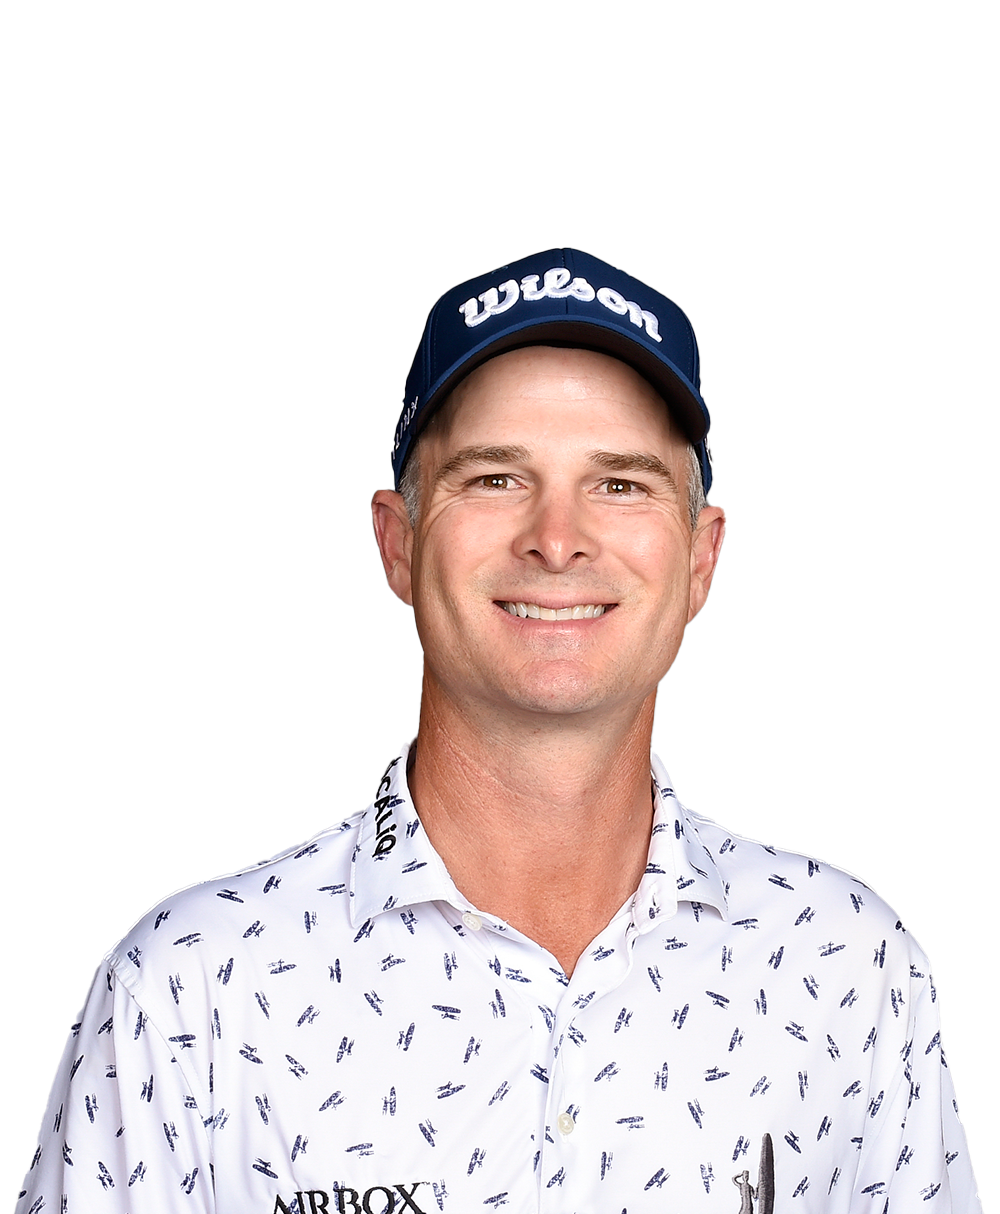 Kevin Streelman and other PGA TOUR pros support needy children